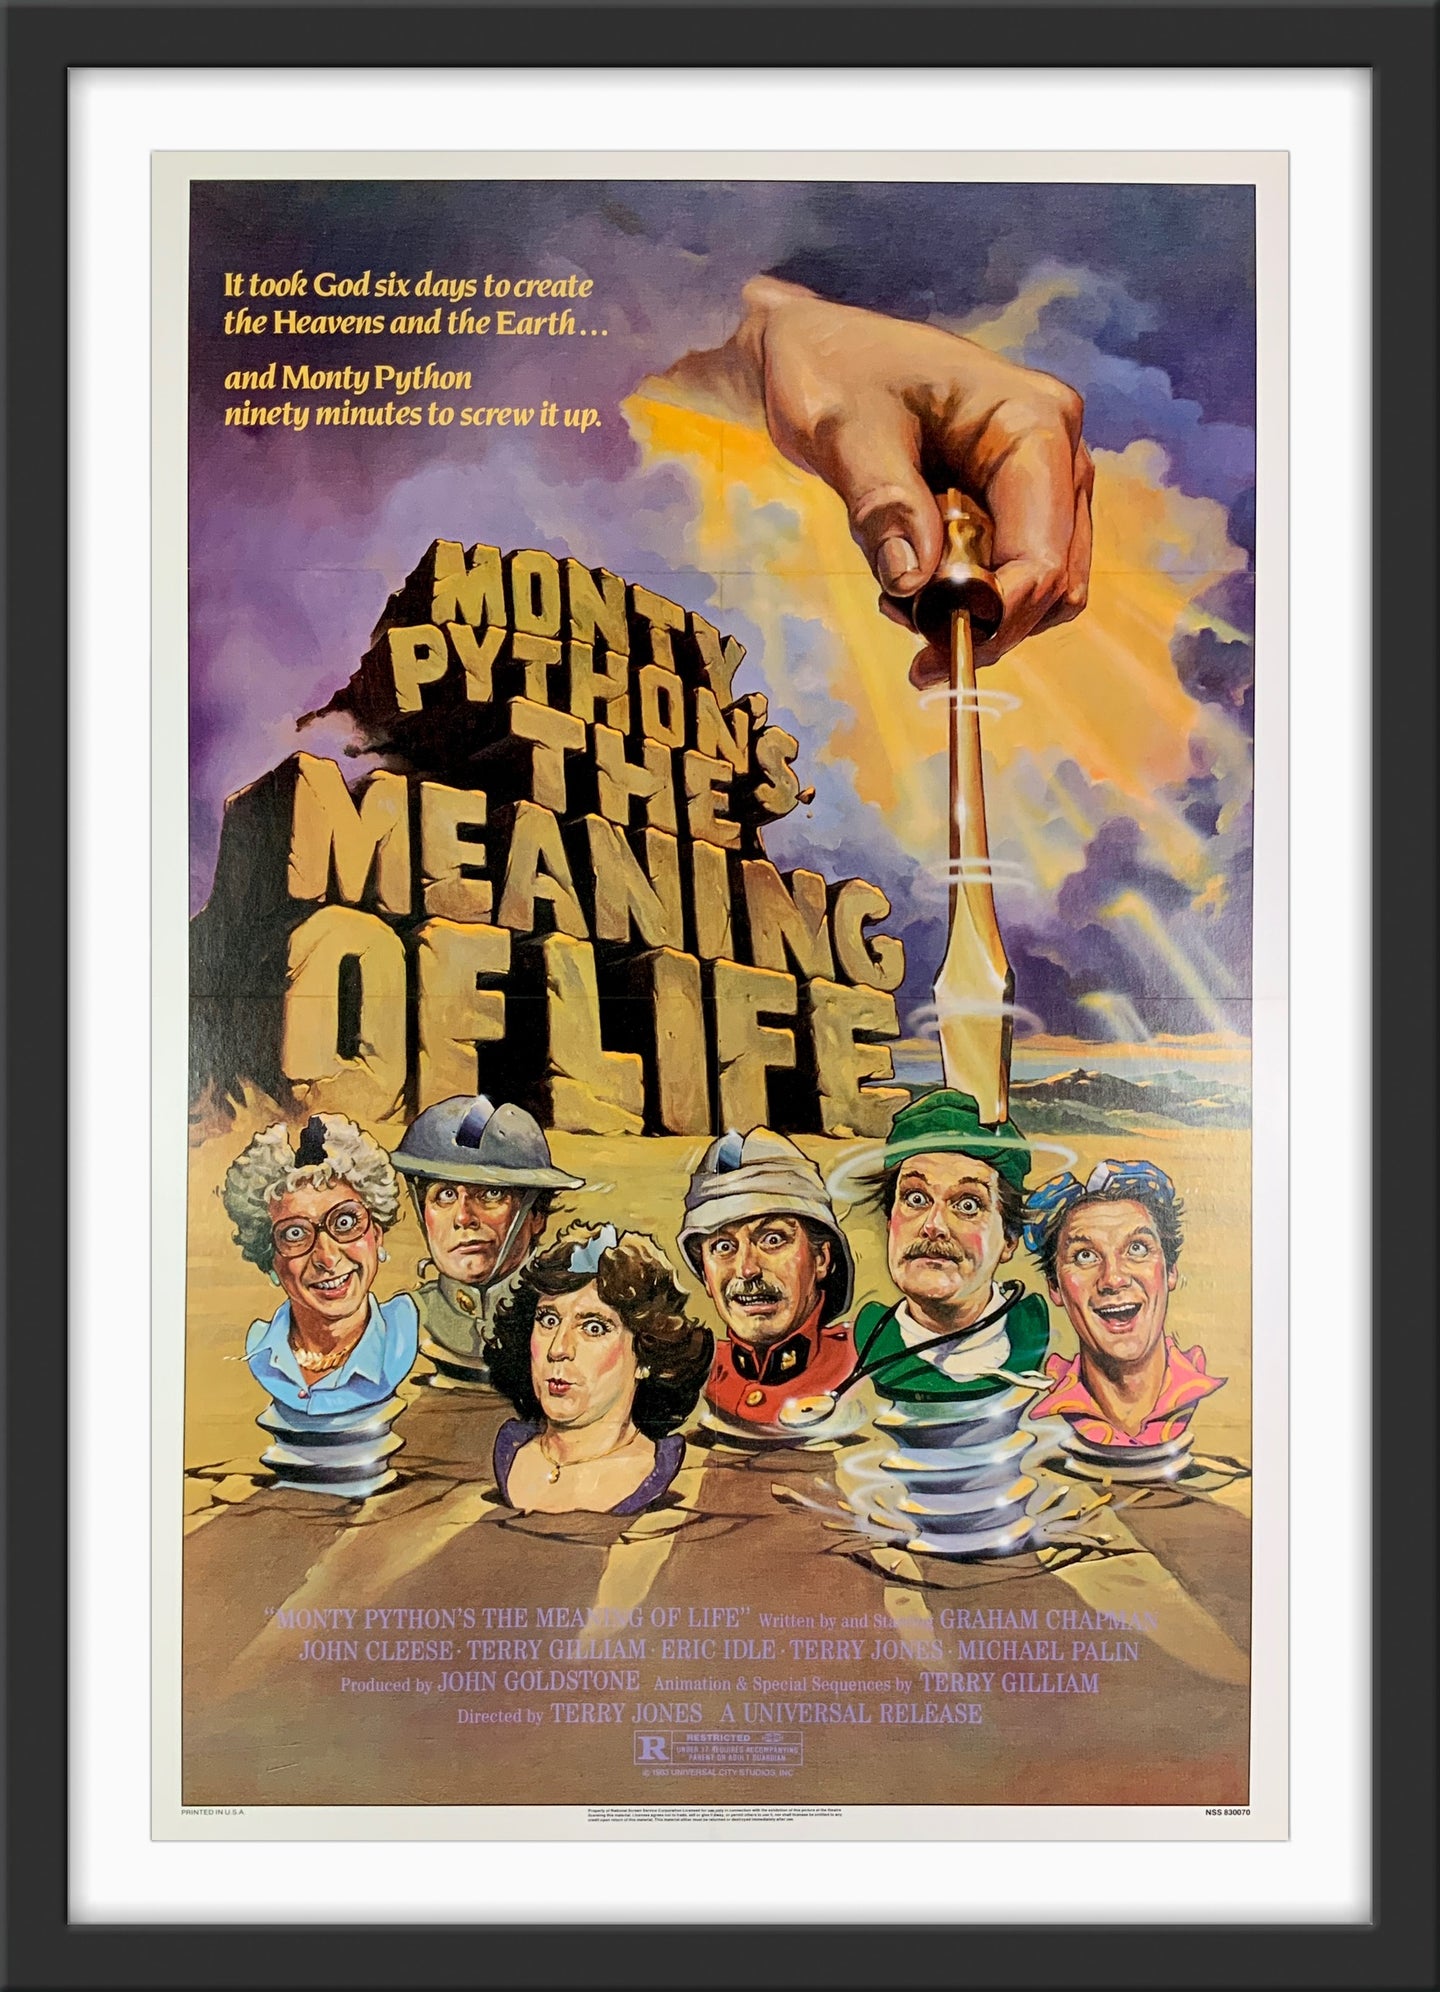 An original movie poster for the film Monty Python's Meaning of Life